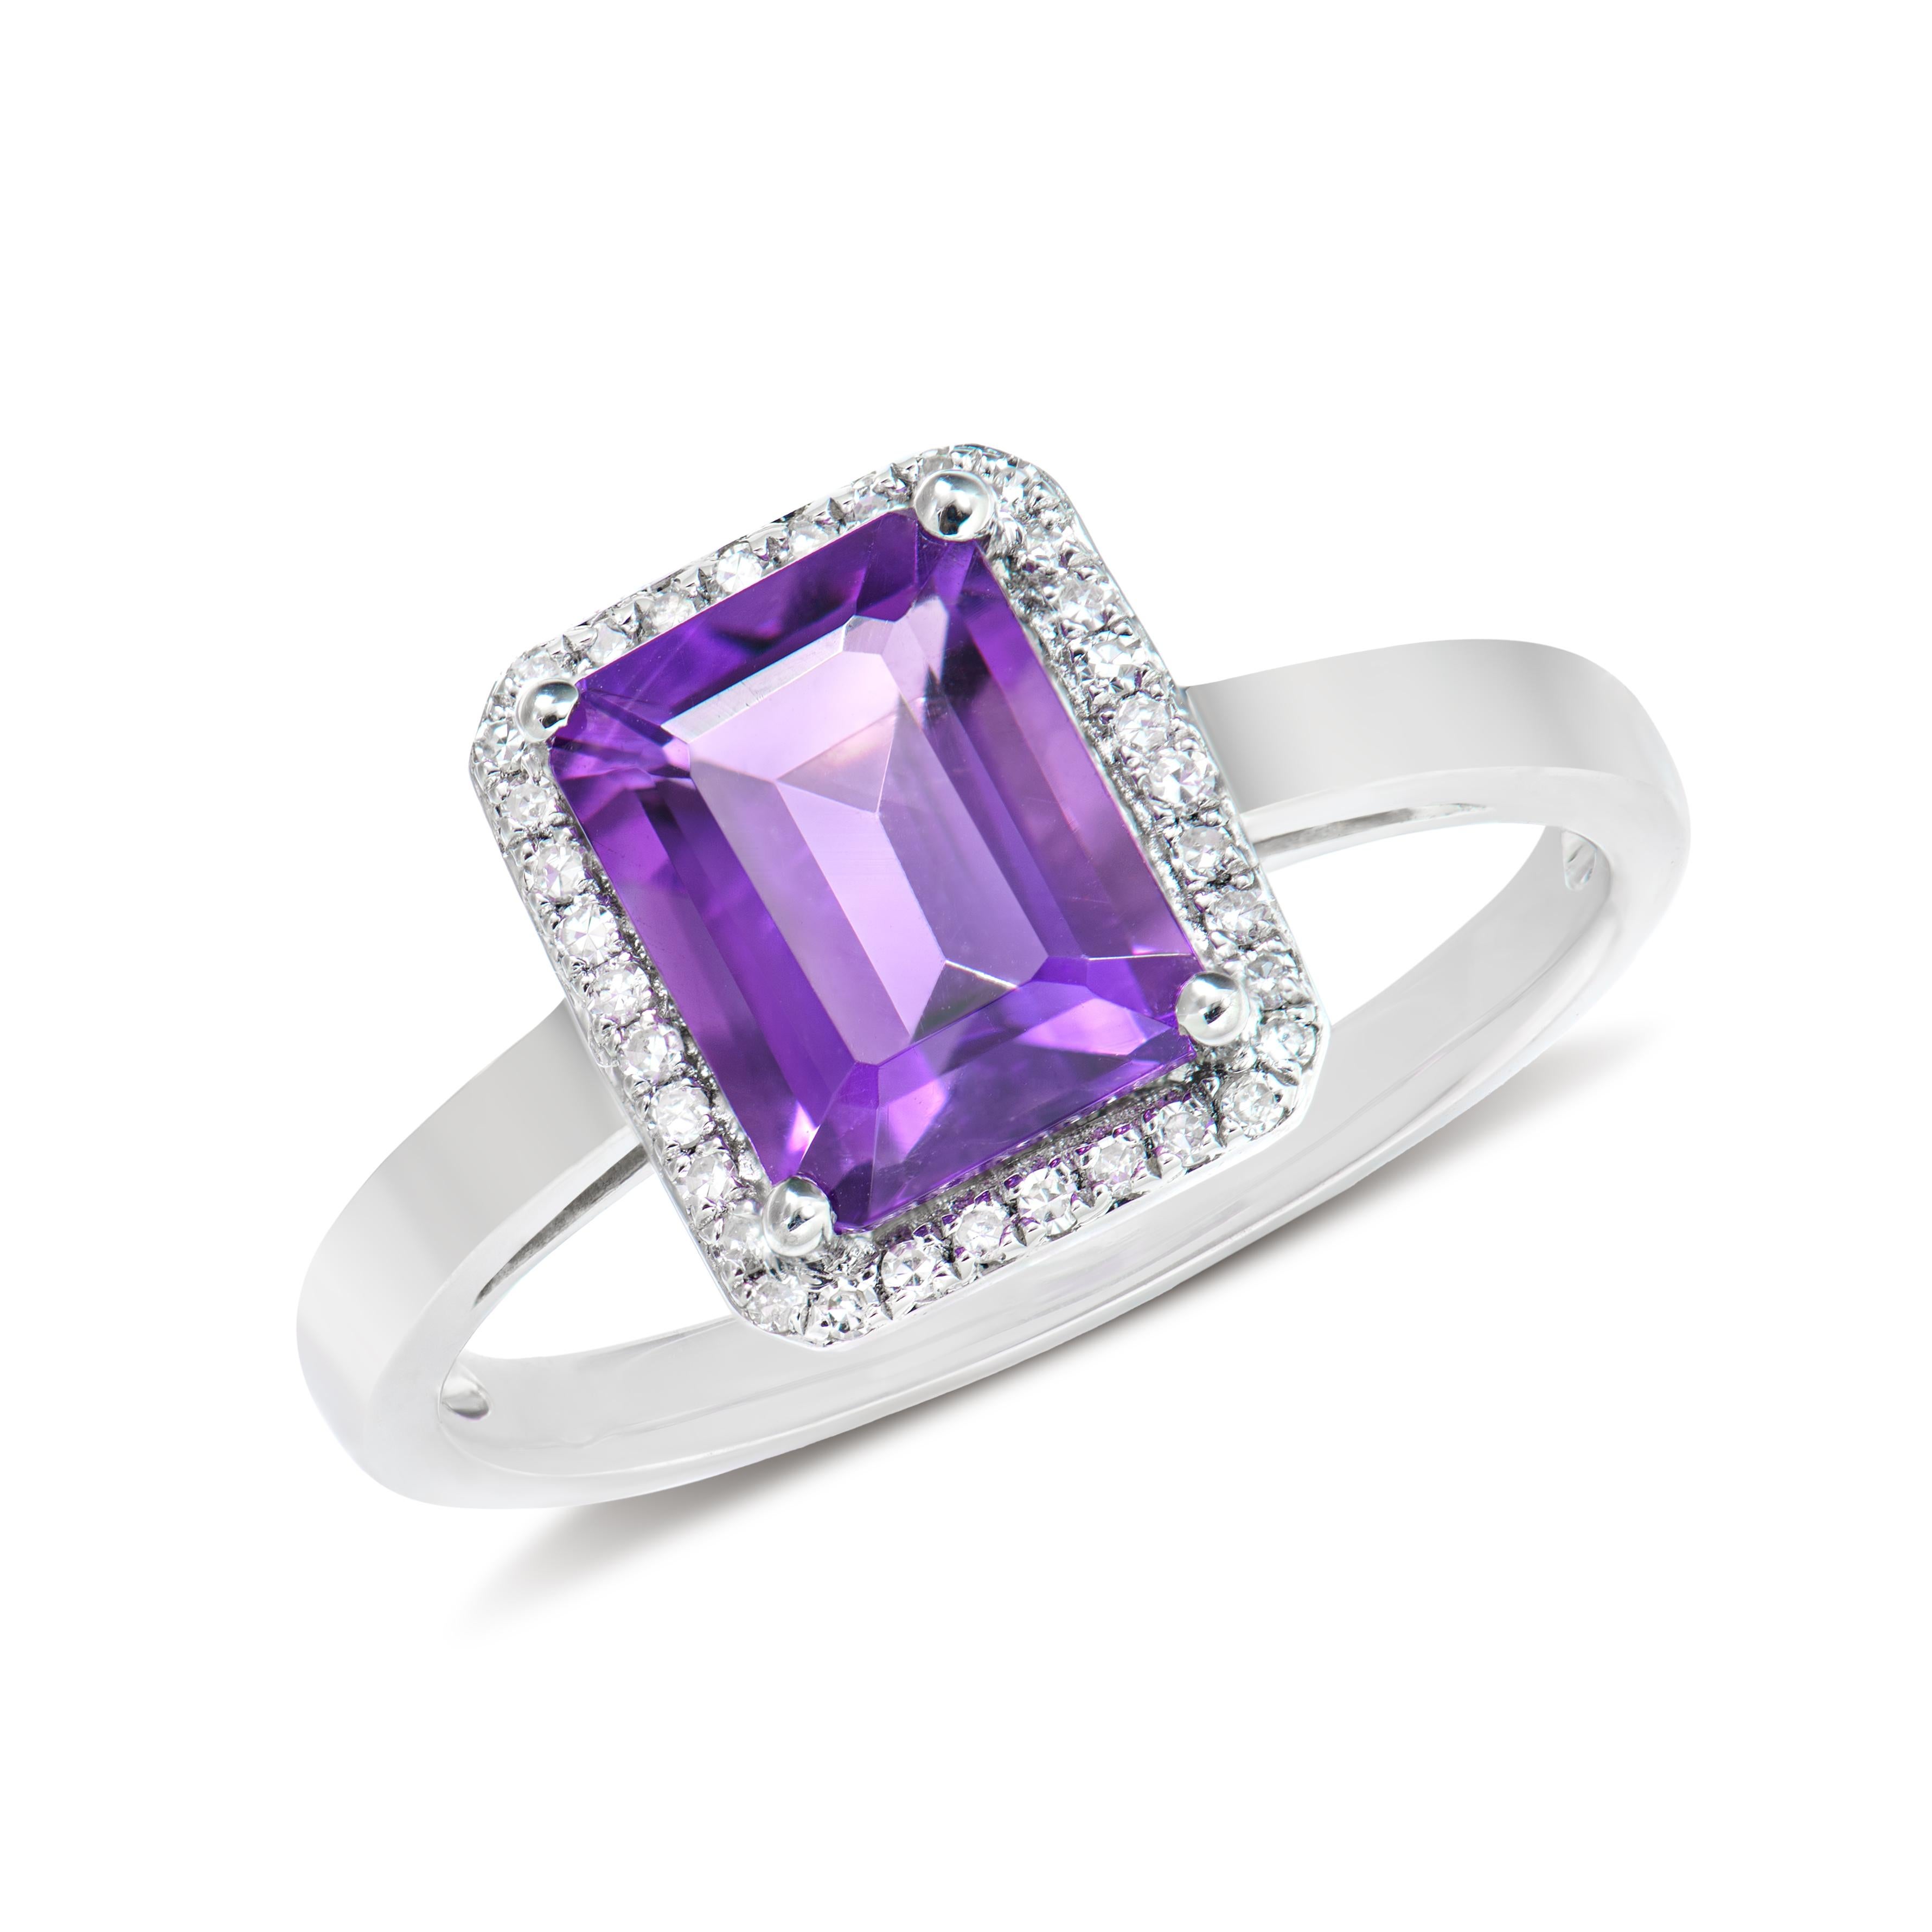 Presented A lovely set of Amethyst for people who value quality and want to wear it to any occasion or celebration. The White gold Amethyst Fancy Ring adorned with diamonds offer a classic yet elegant appearance.
  
Amethyst Fancy Ring in 18Karat